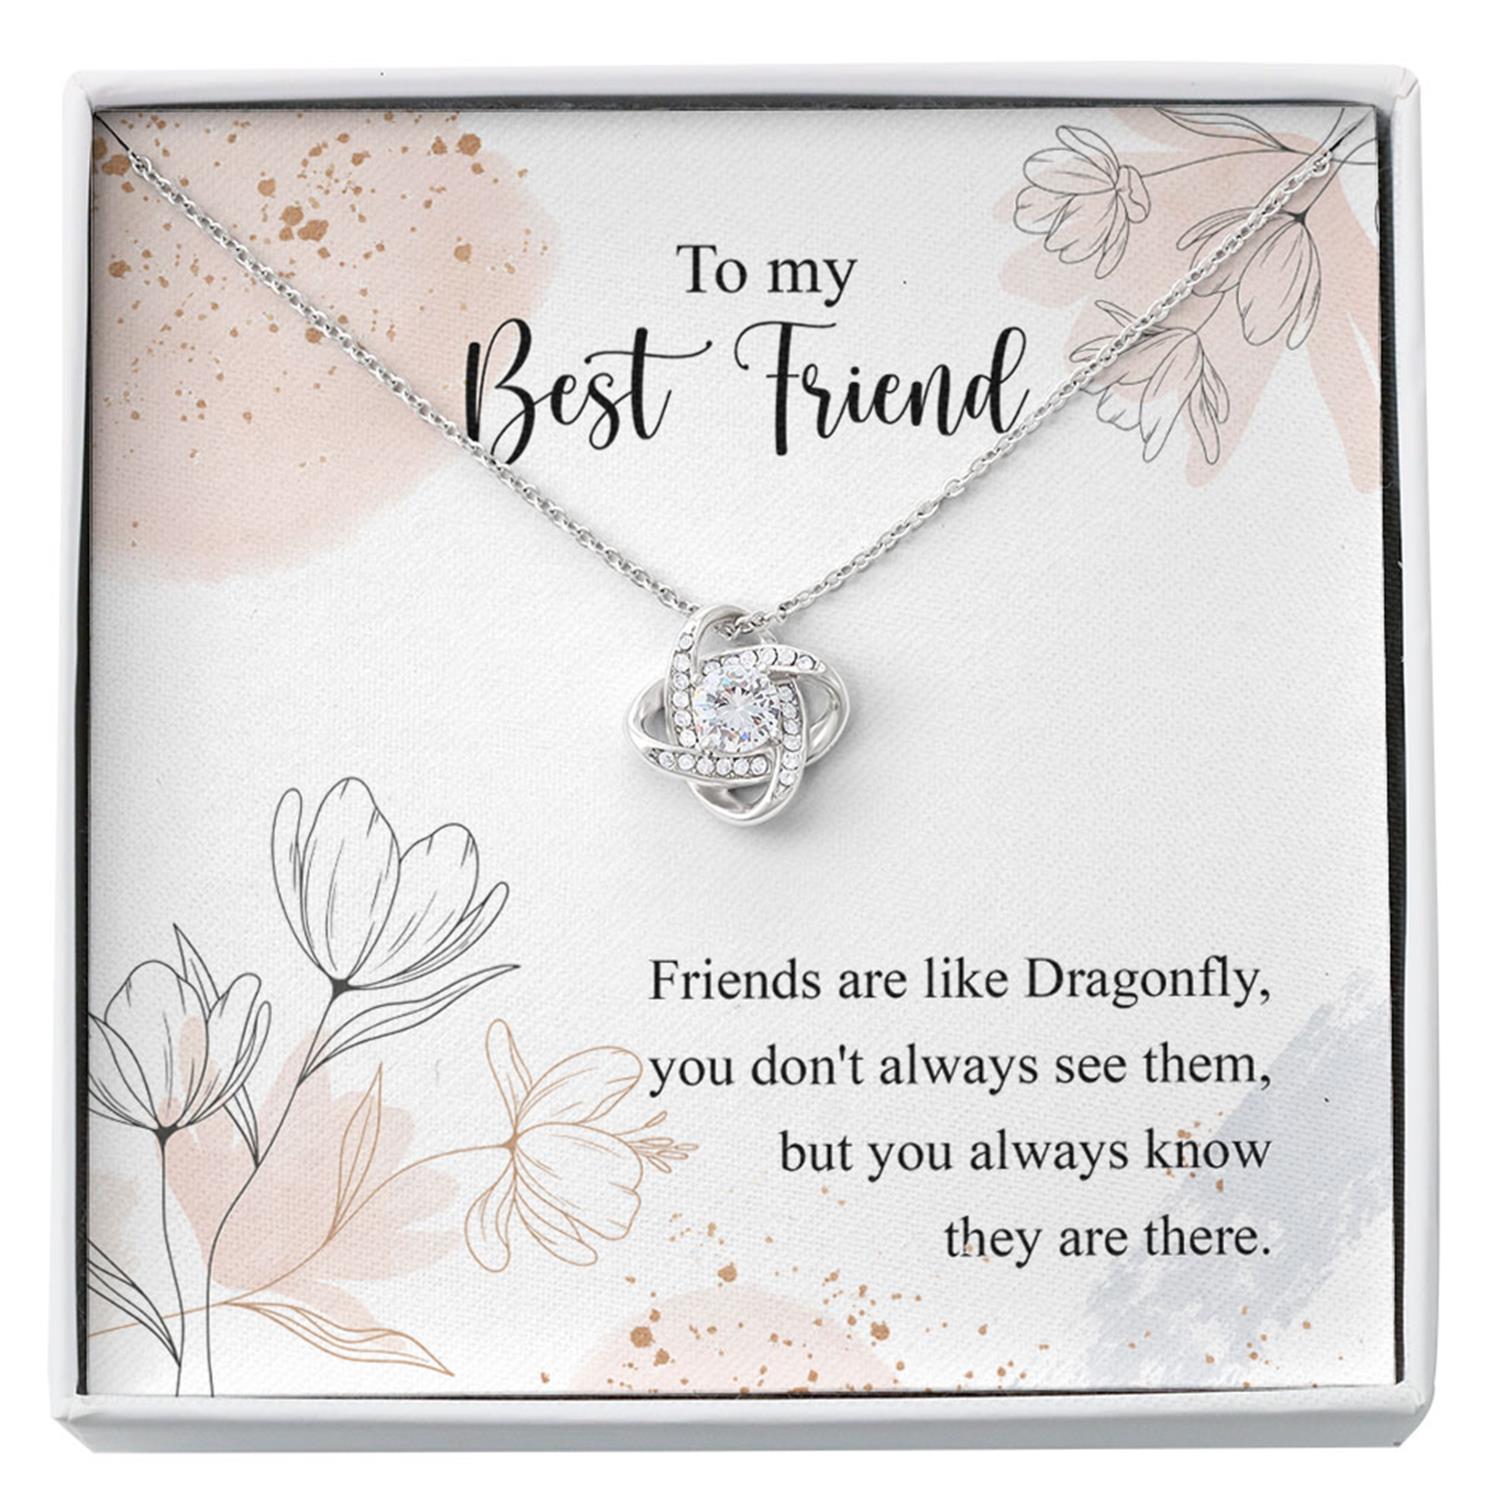 Friend Necklace, Sister Necklace, To My Best Friend Necklace - Friend Are Like Dragonfly You Don't Always See Custom Necklace